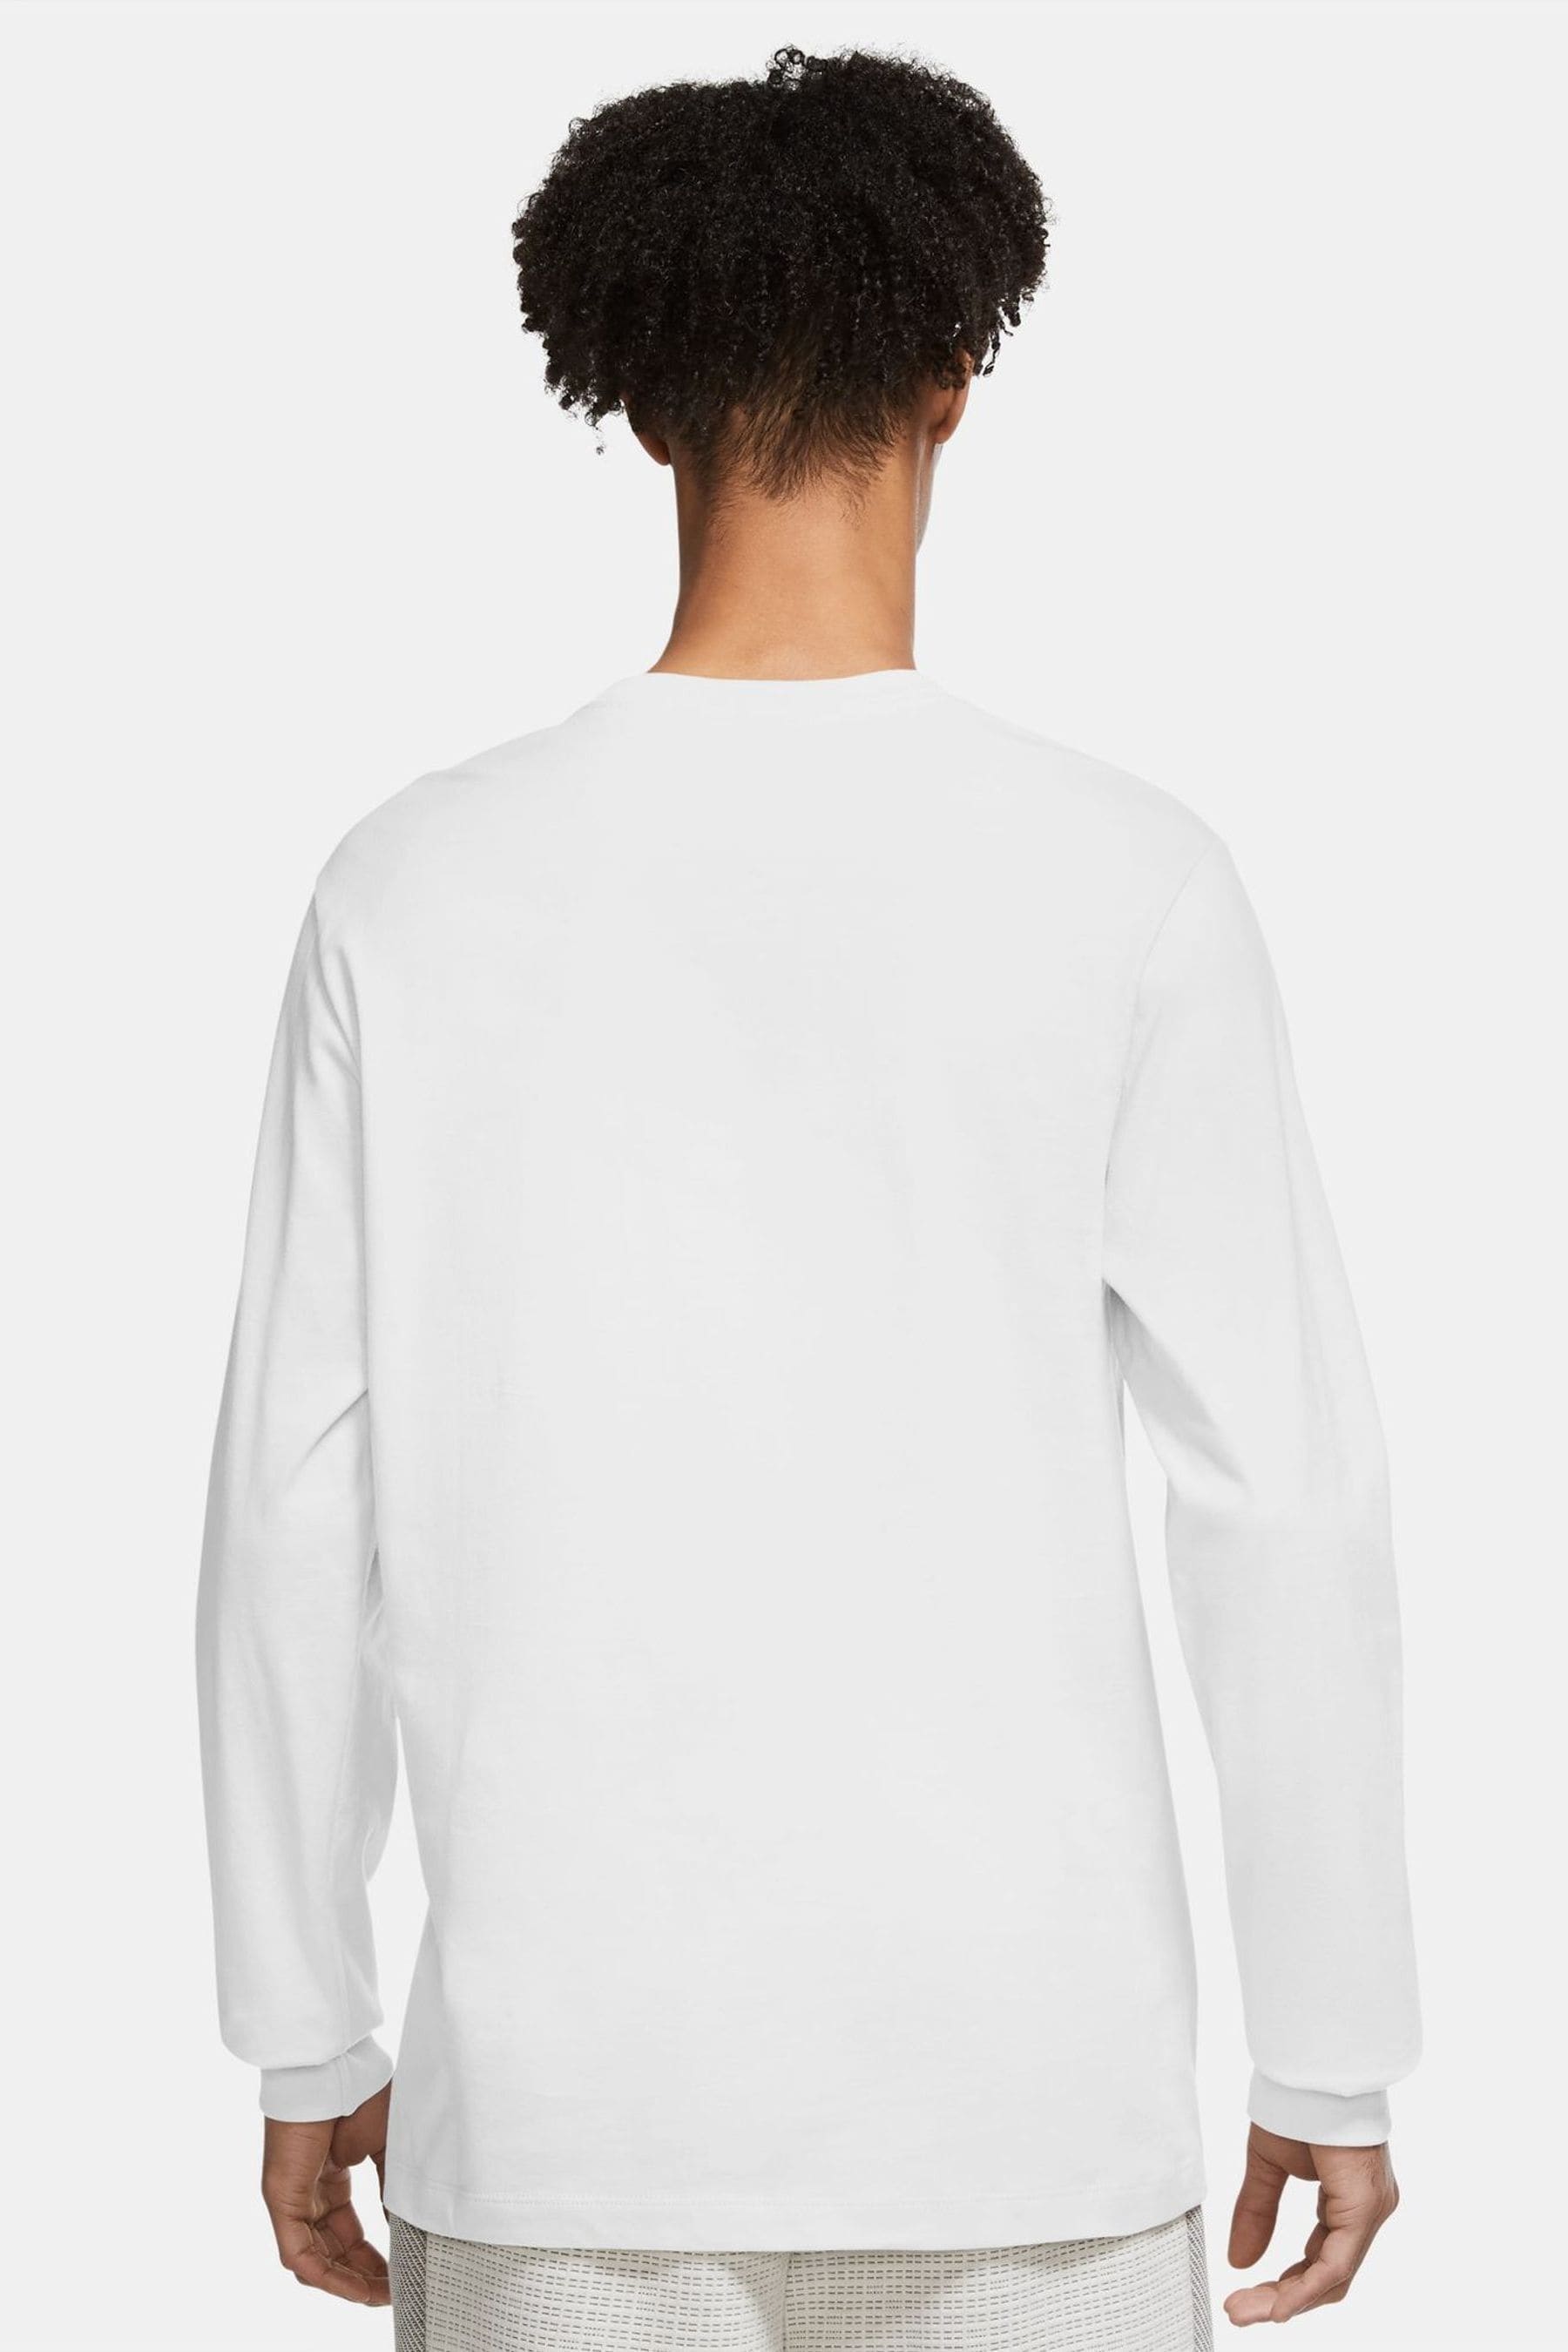 Buy Nike White Club Long Sleeve T-Shirt from the Next UK online shop